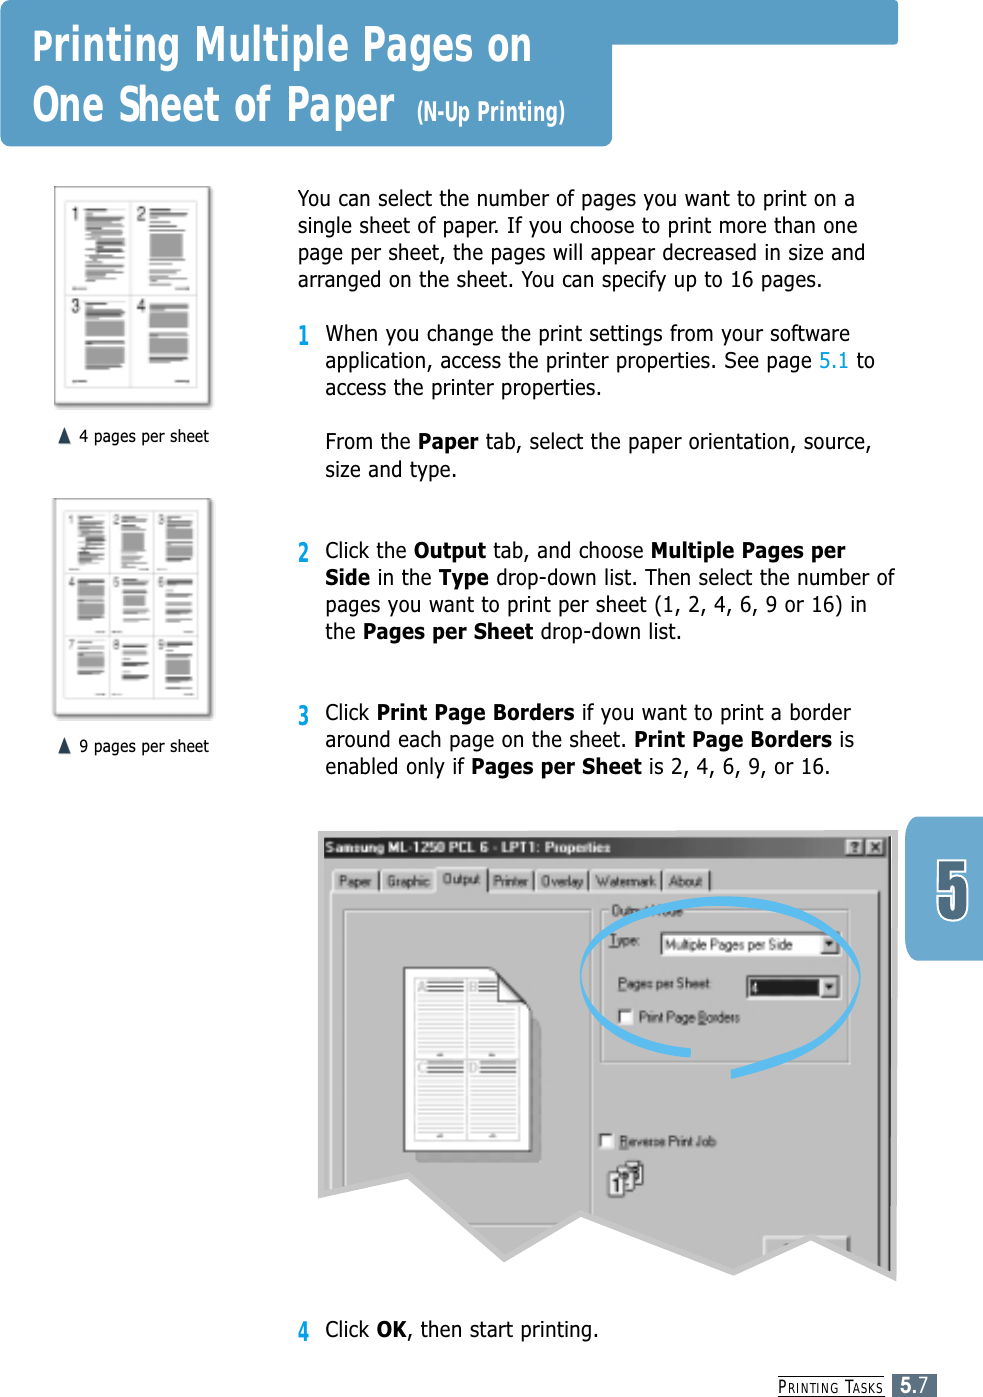 PRINTING TASKS5.7You can select the number of pages you want to print on asingle sheet of paper. If you choose to print more than onepage per sheet, the pages will appear decreased in size andarranged on the sheet. You can specify up to 16 pages.1When you change the print settings from your softwareapplication, access the printer properties. See page 5.1 toaccess the printer properties.From the Paper tab, select the paper orientation, source,size and type.2Click the Output tab, and choose Multiple Pages perSide in the Type drop-down list. Then select the number ofpages you want to print per sheet (1, 2, 4, 6, 9 or 16) inthe Pages per Sheet drop-down list.3Click Print Page Borders if you want to print a borderaround each page on the sheet. Print Page Borders isenabled only if Pages per Sheet is 2, 4, 6, 9, or 16.4 pages per sheet9 pages per sheetPrinting Multiple Pages on One Sheet of Paper (N-Up Printing)4Click OK, then start printing. 